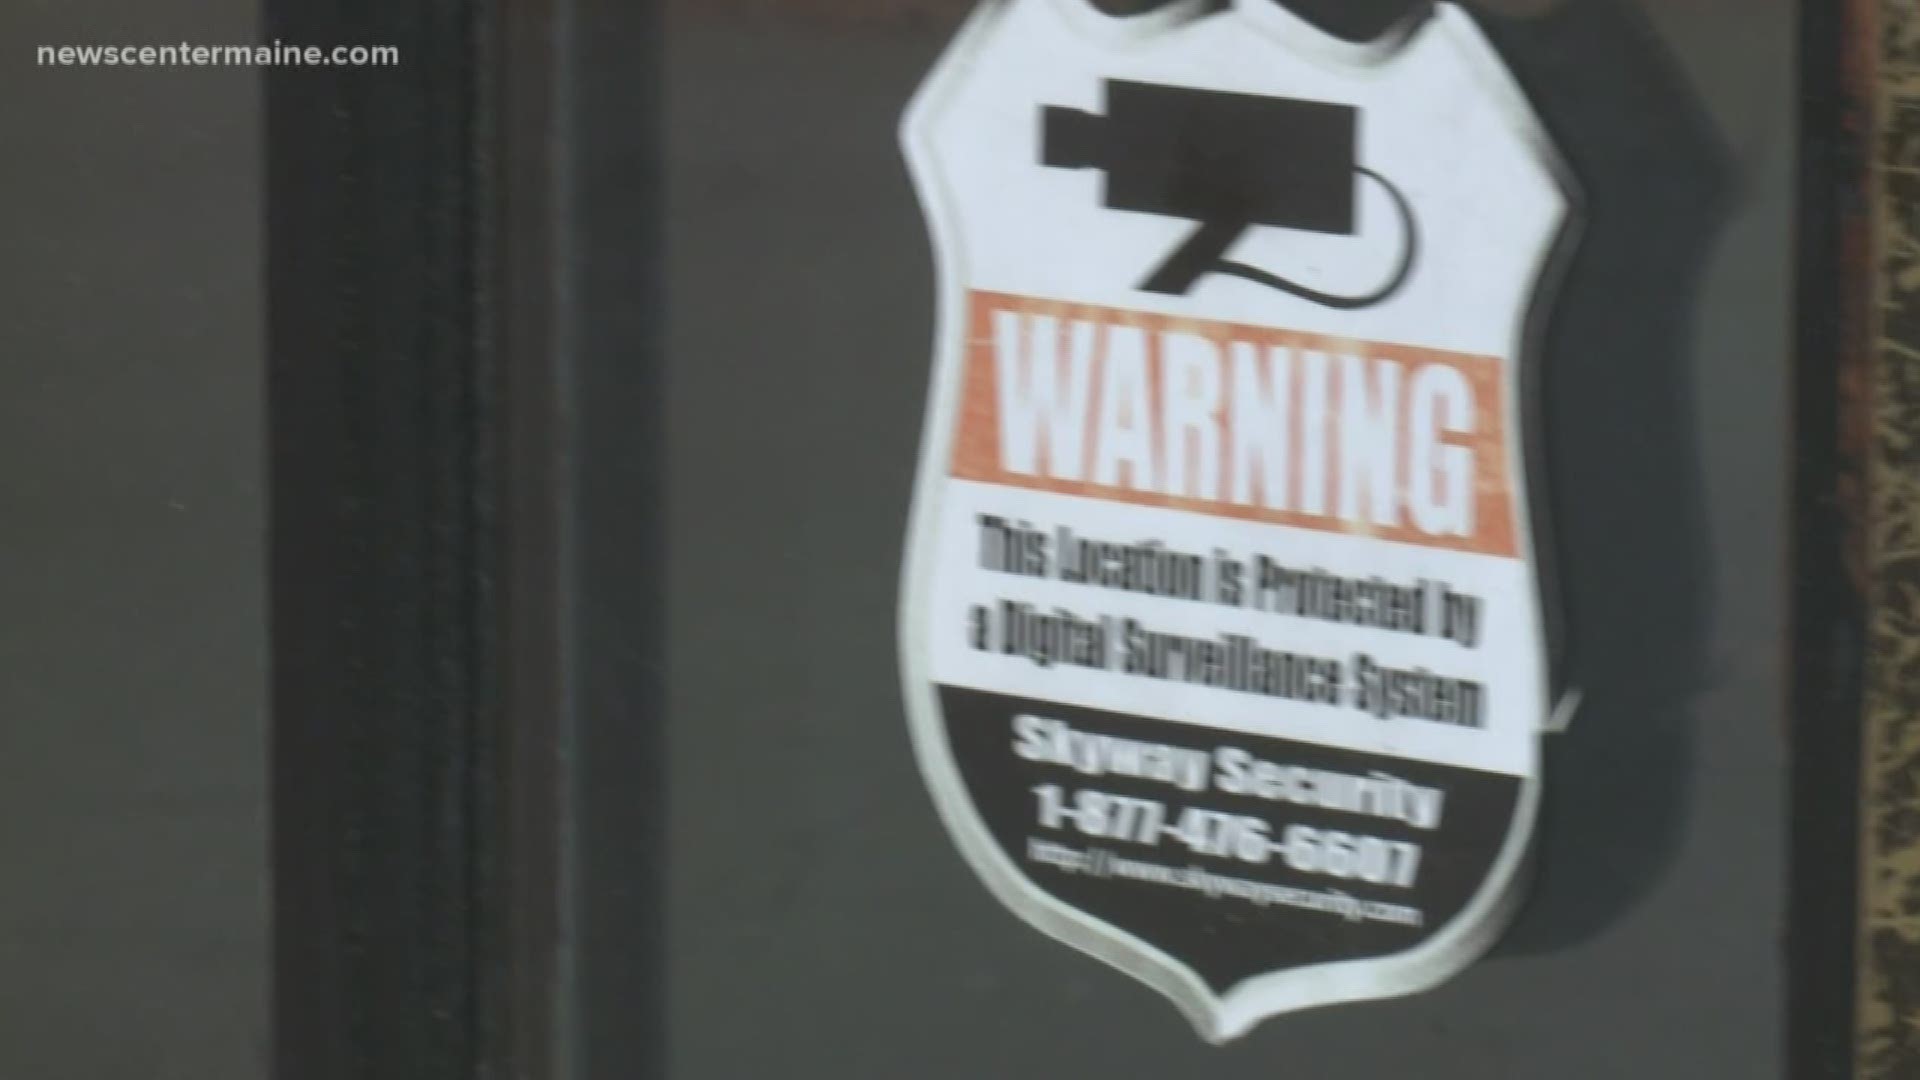 Portland small businesses impacted by burglaries.